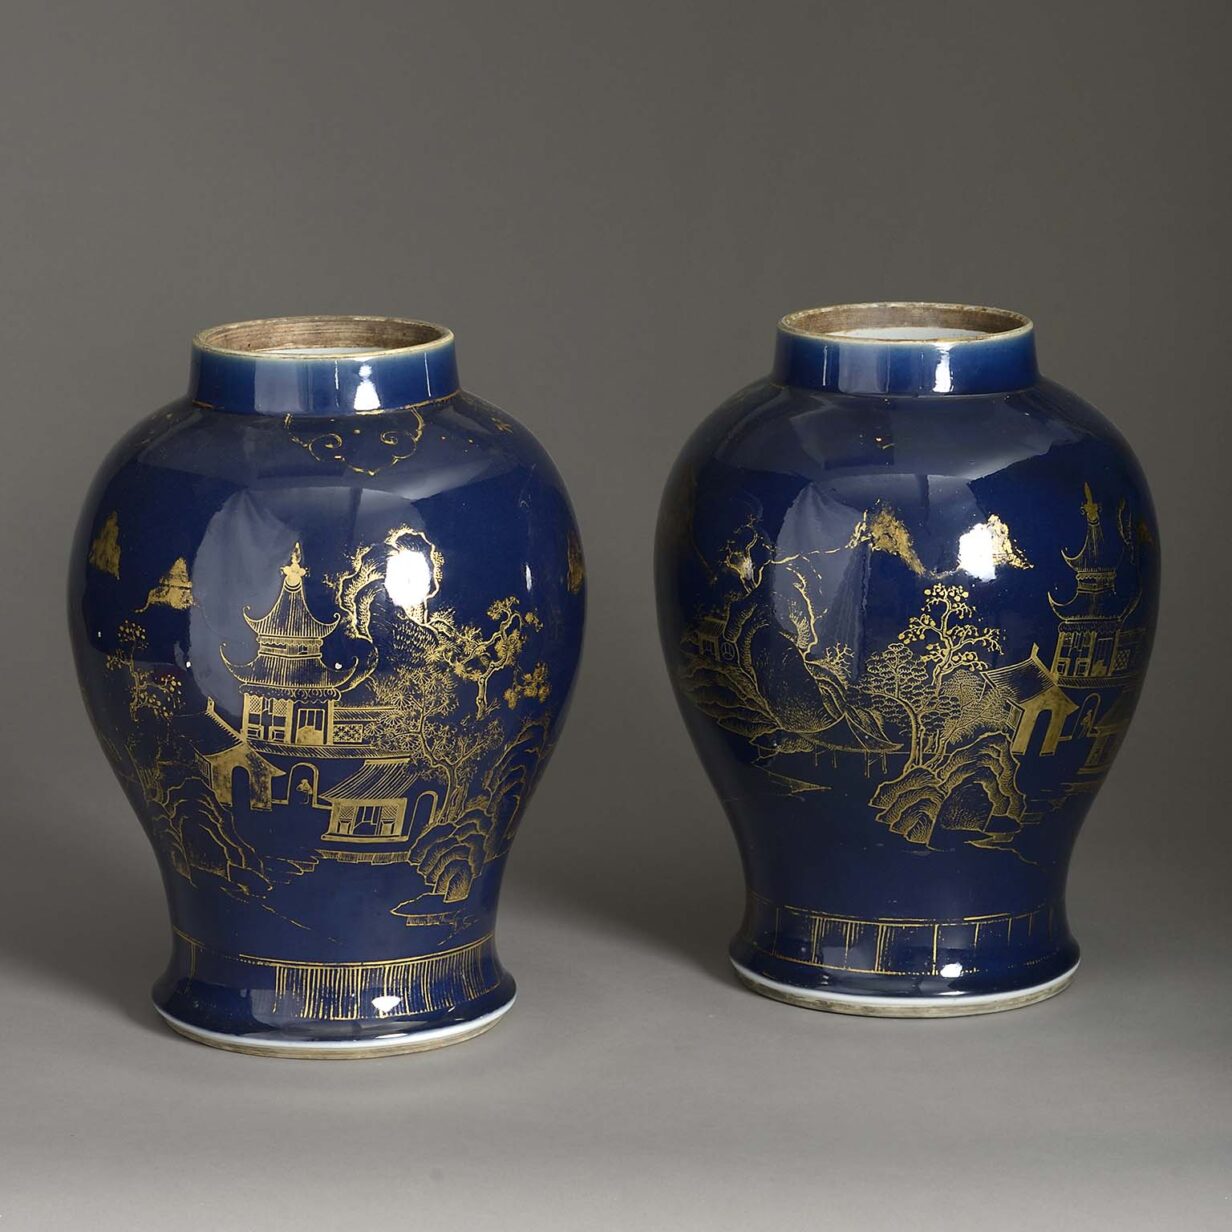 Pair of early 19th century blue and gilt glazed baluster porcelain vases